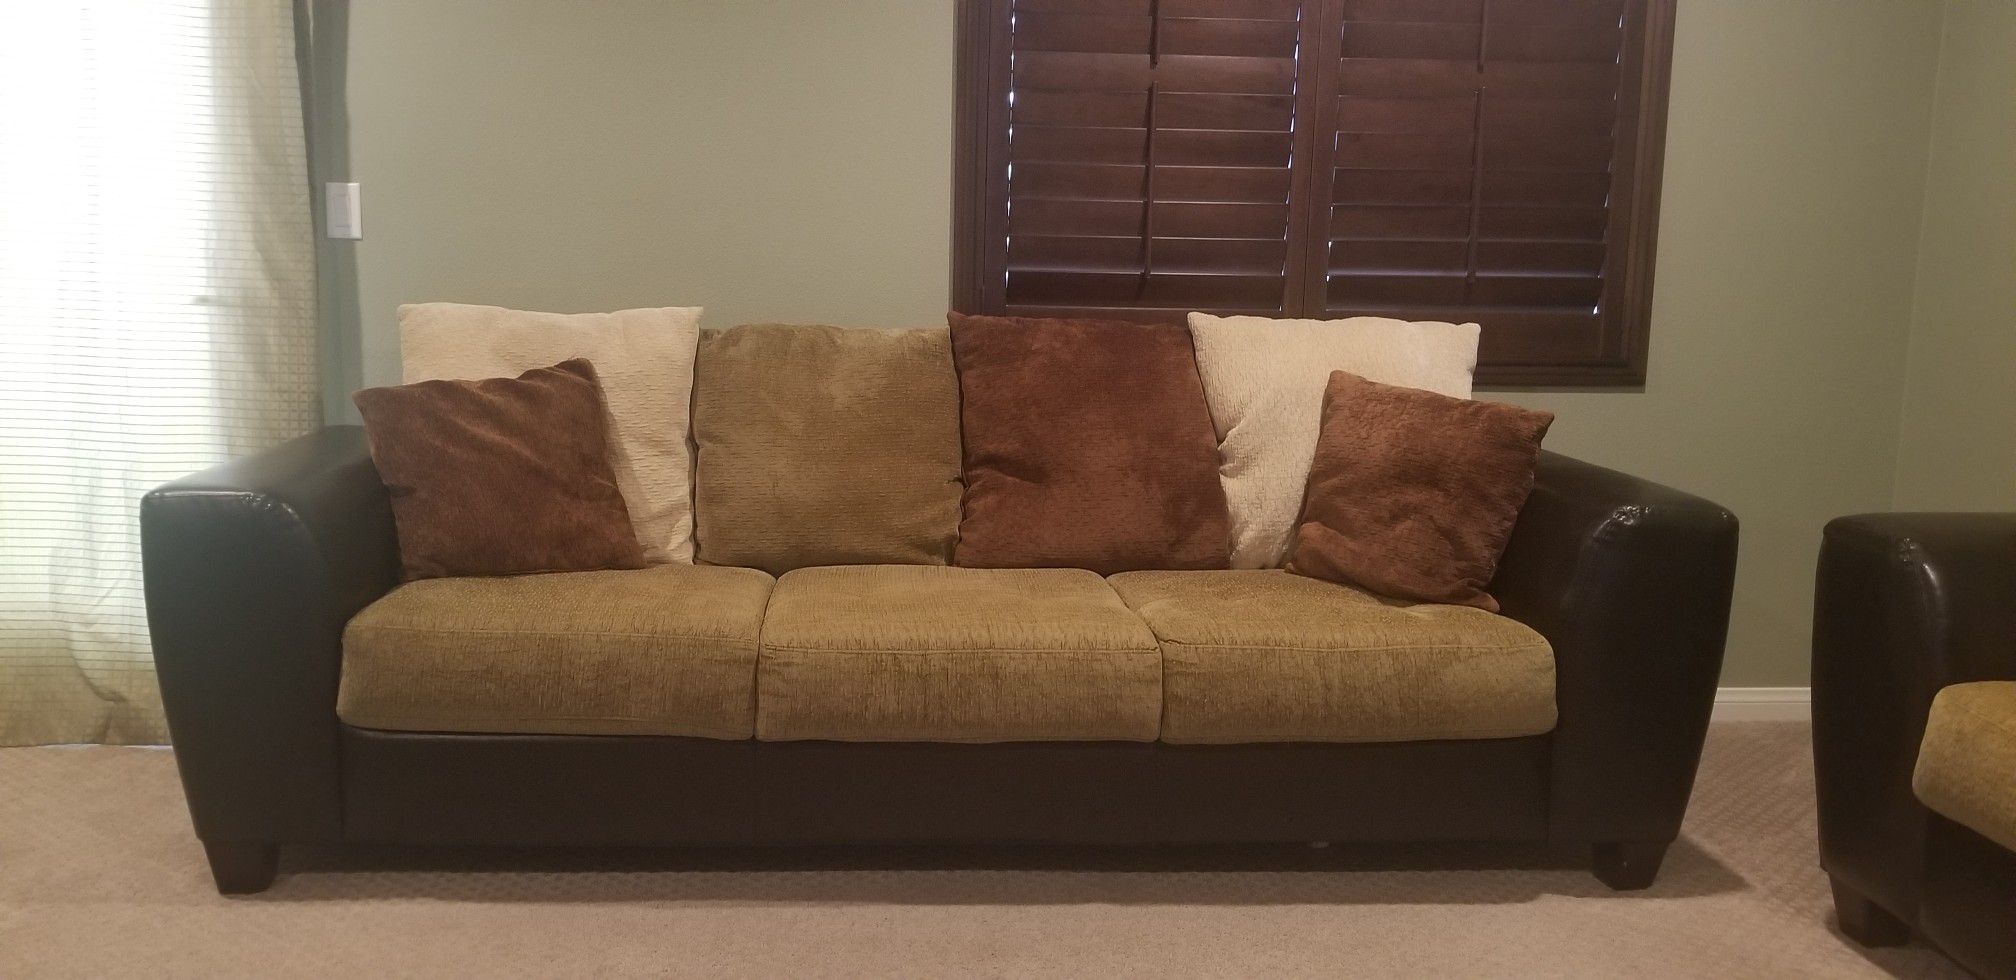 Sofa, Love seat, coffee table and end table